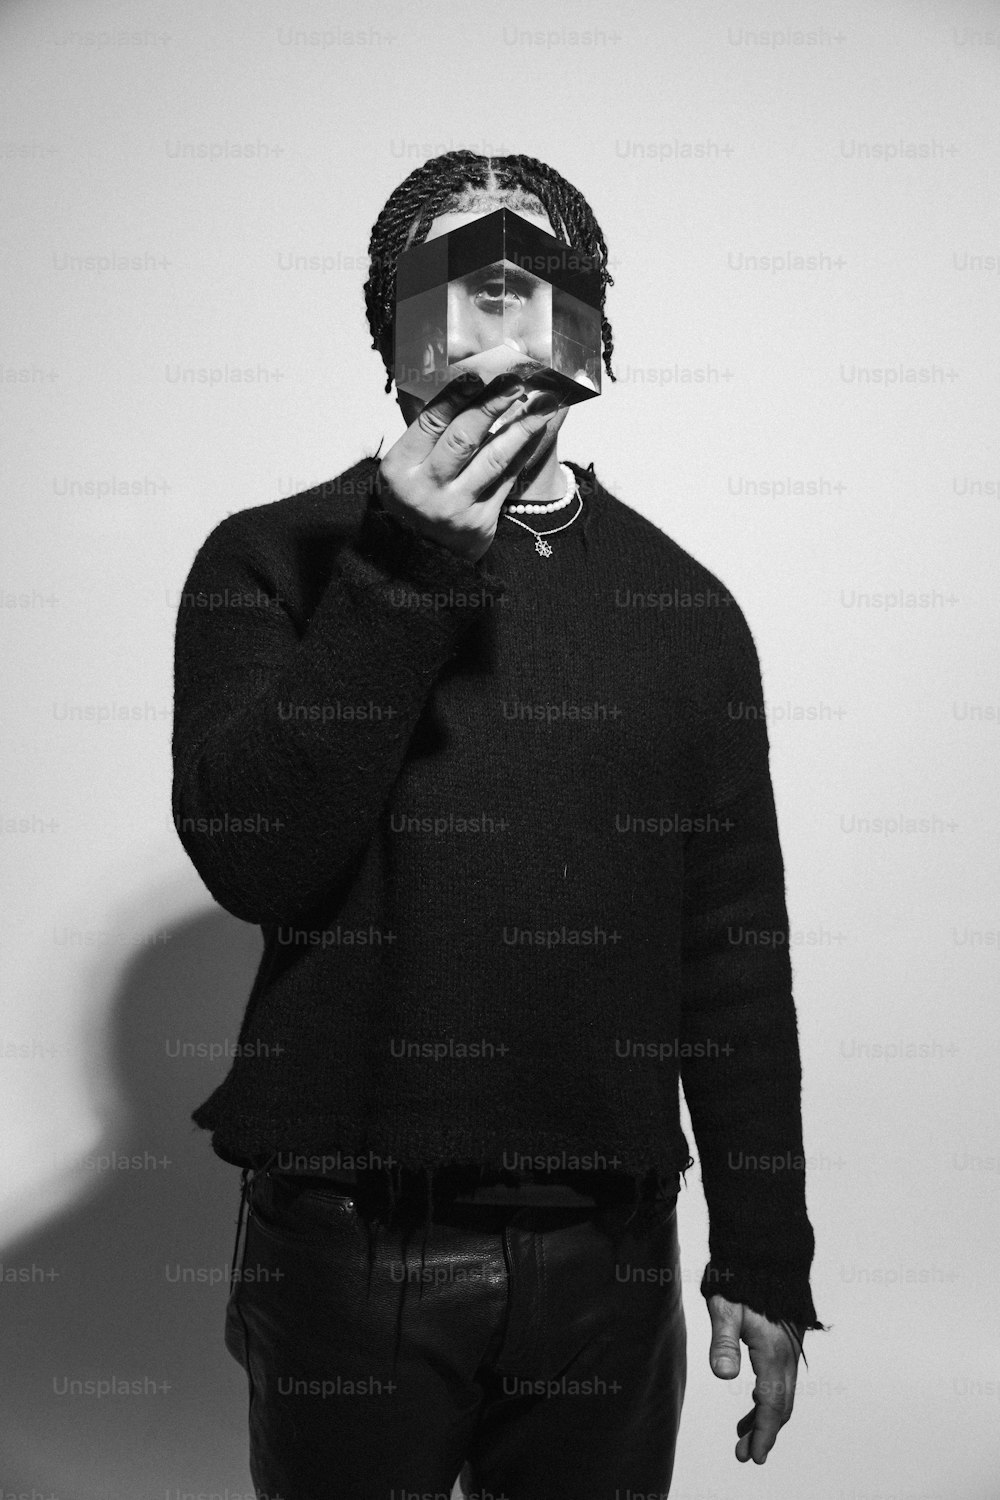 a man in a black sweater is holding a cigarette